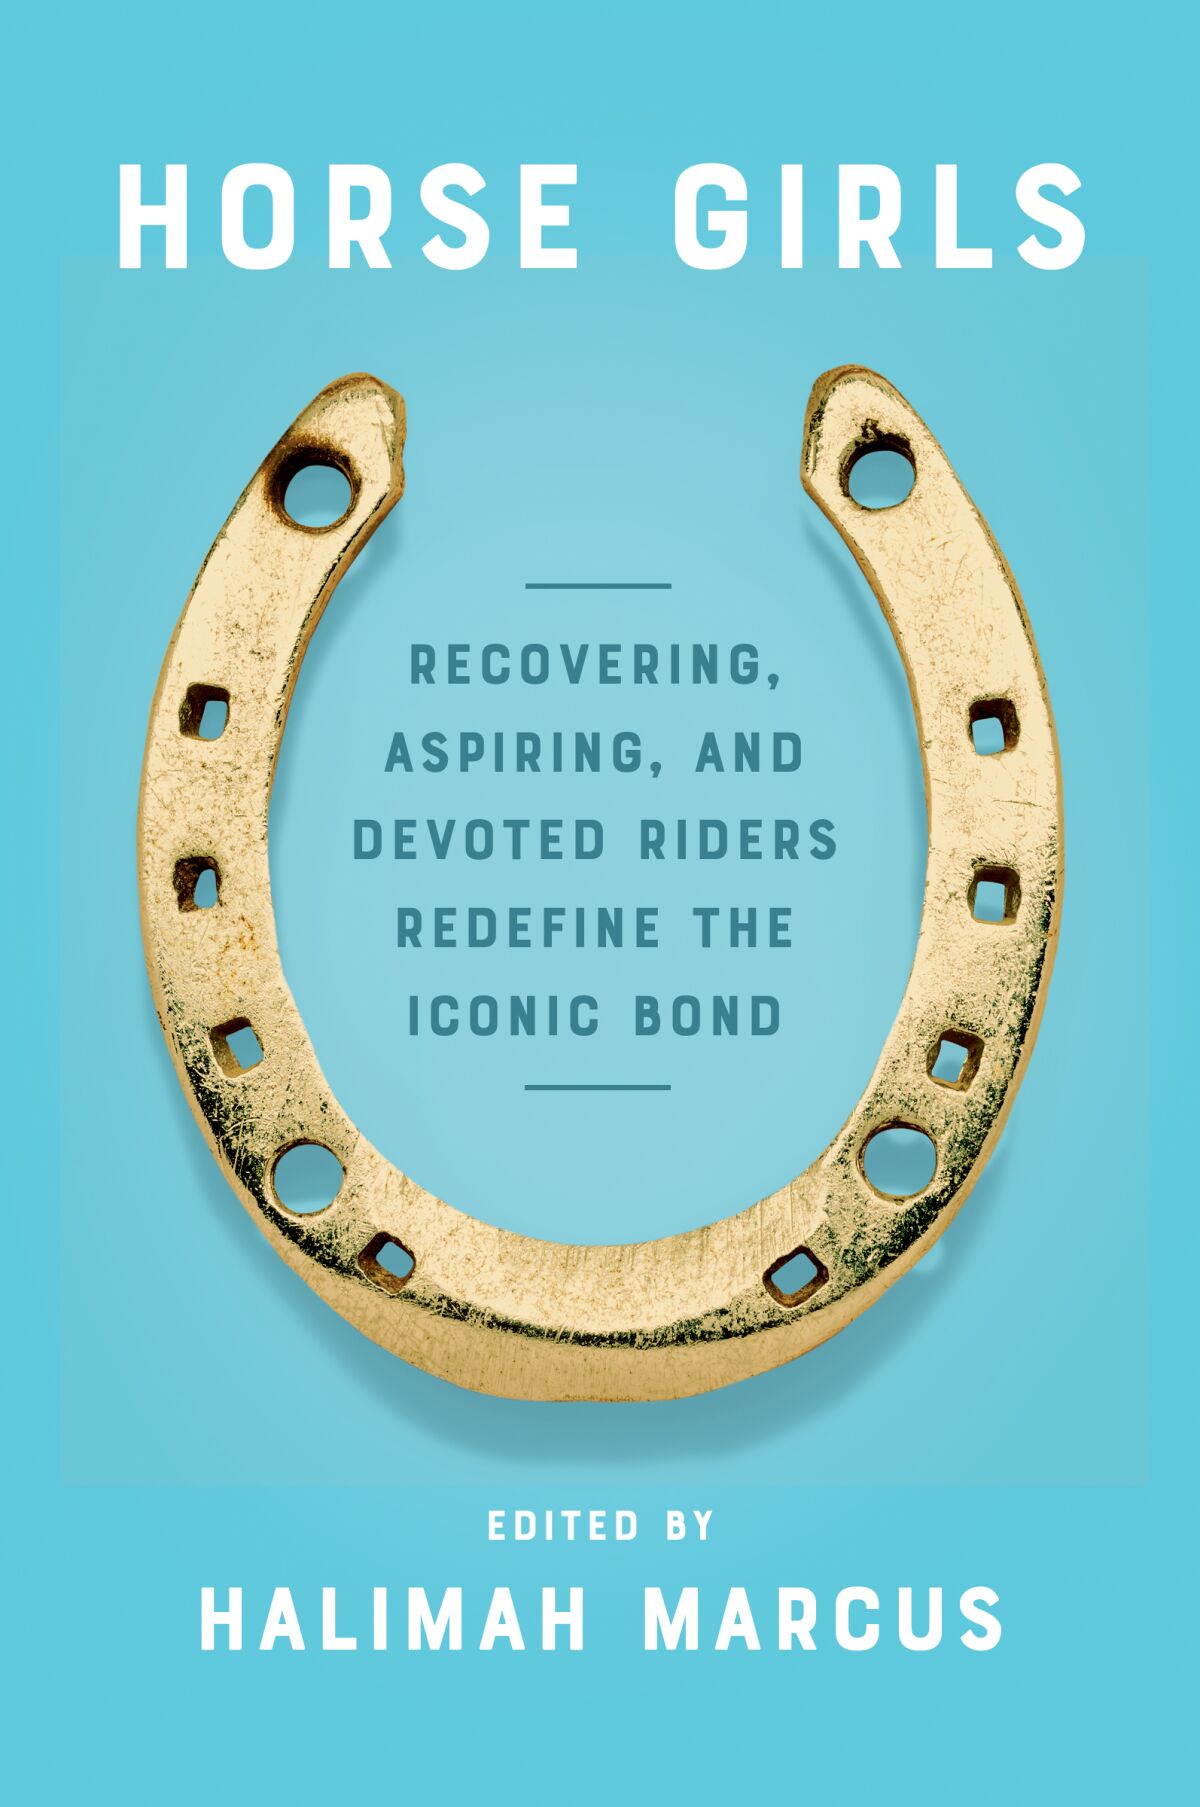 Blue cover of "Horse Girls: Recovering, Aspiring, and Devoted Riders Redefine the Iconic Bond" with a gold horseshoe